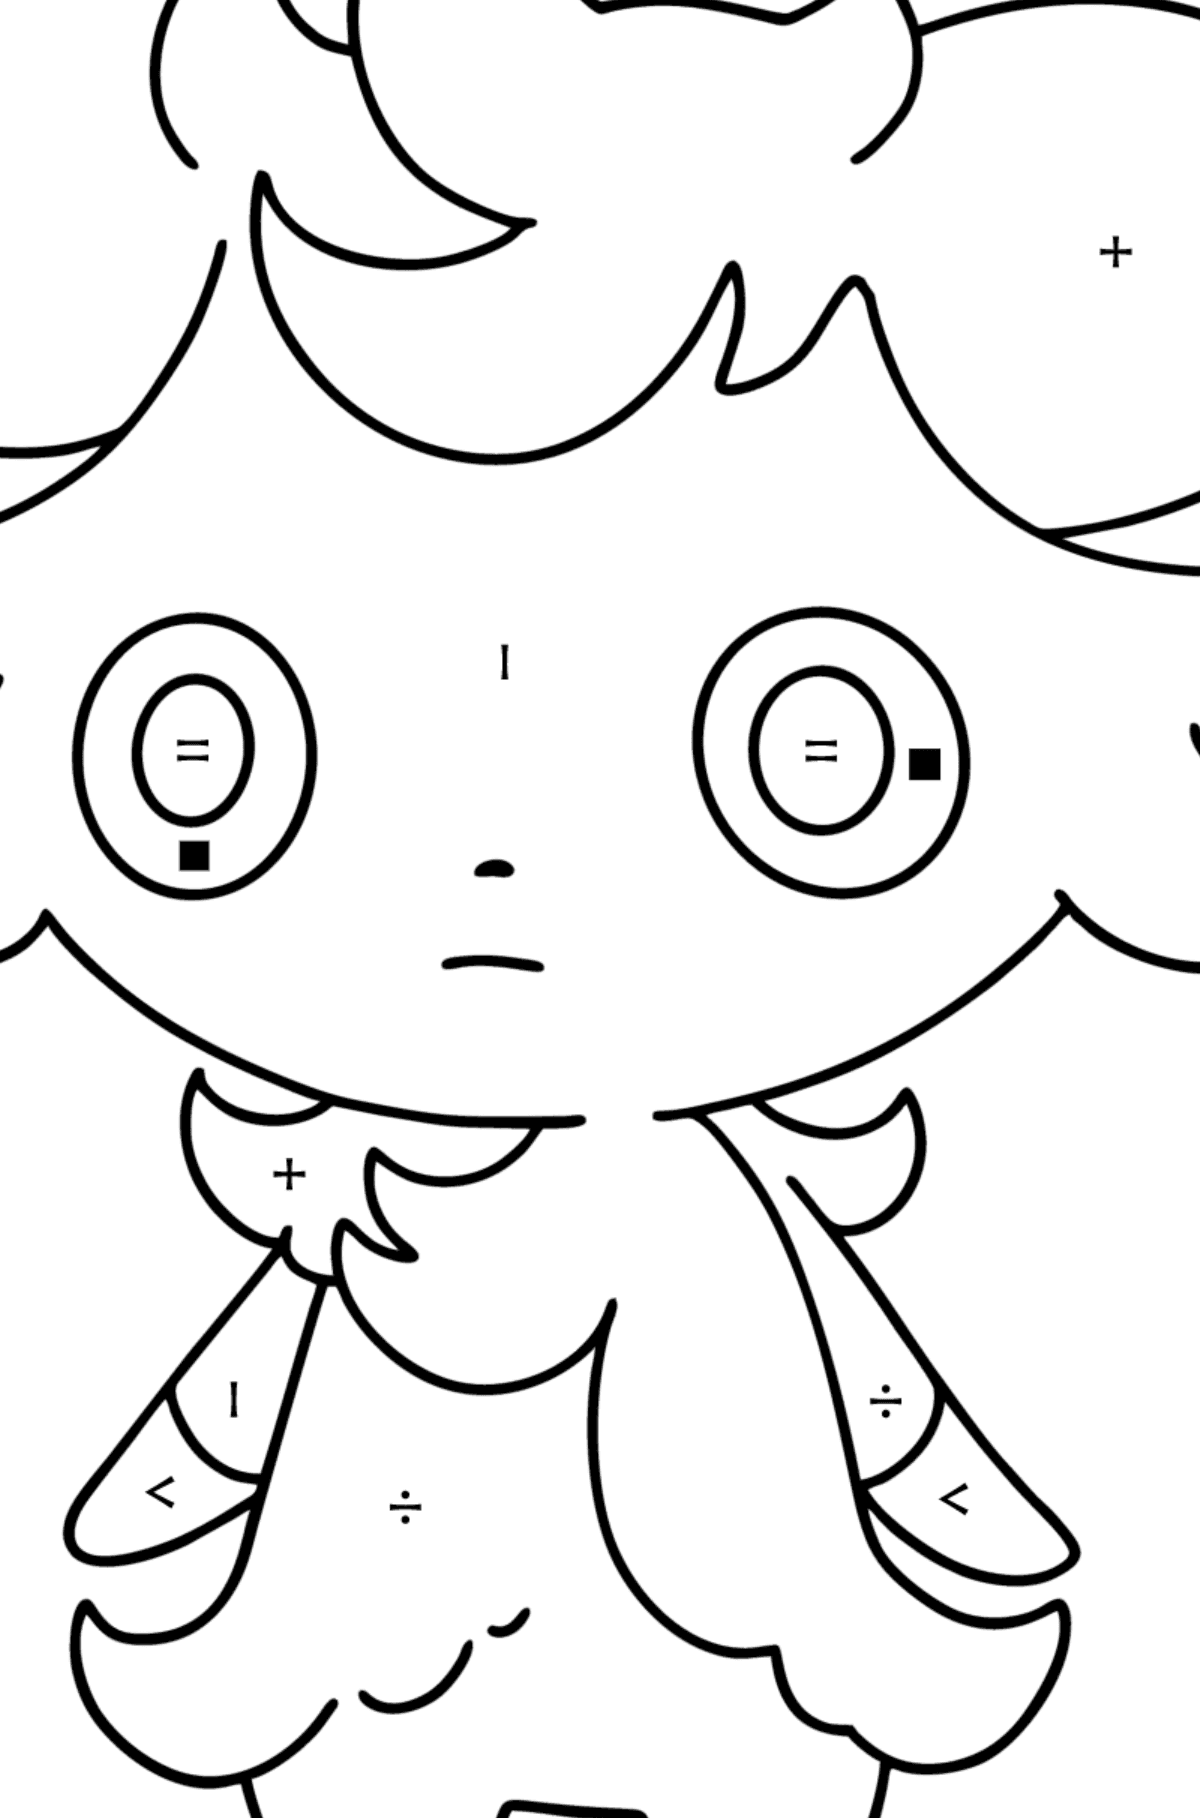 Pokemon Go Espurr coloring page - Coloring by Symbols for Kids